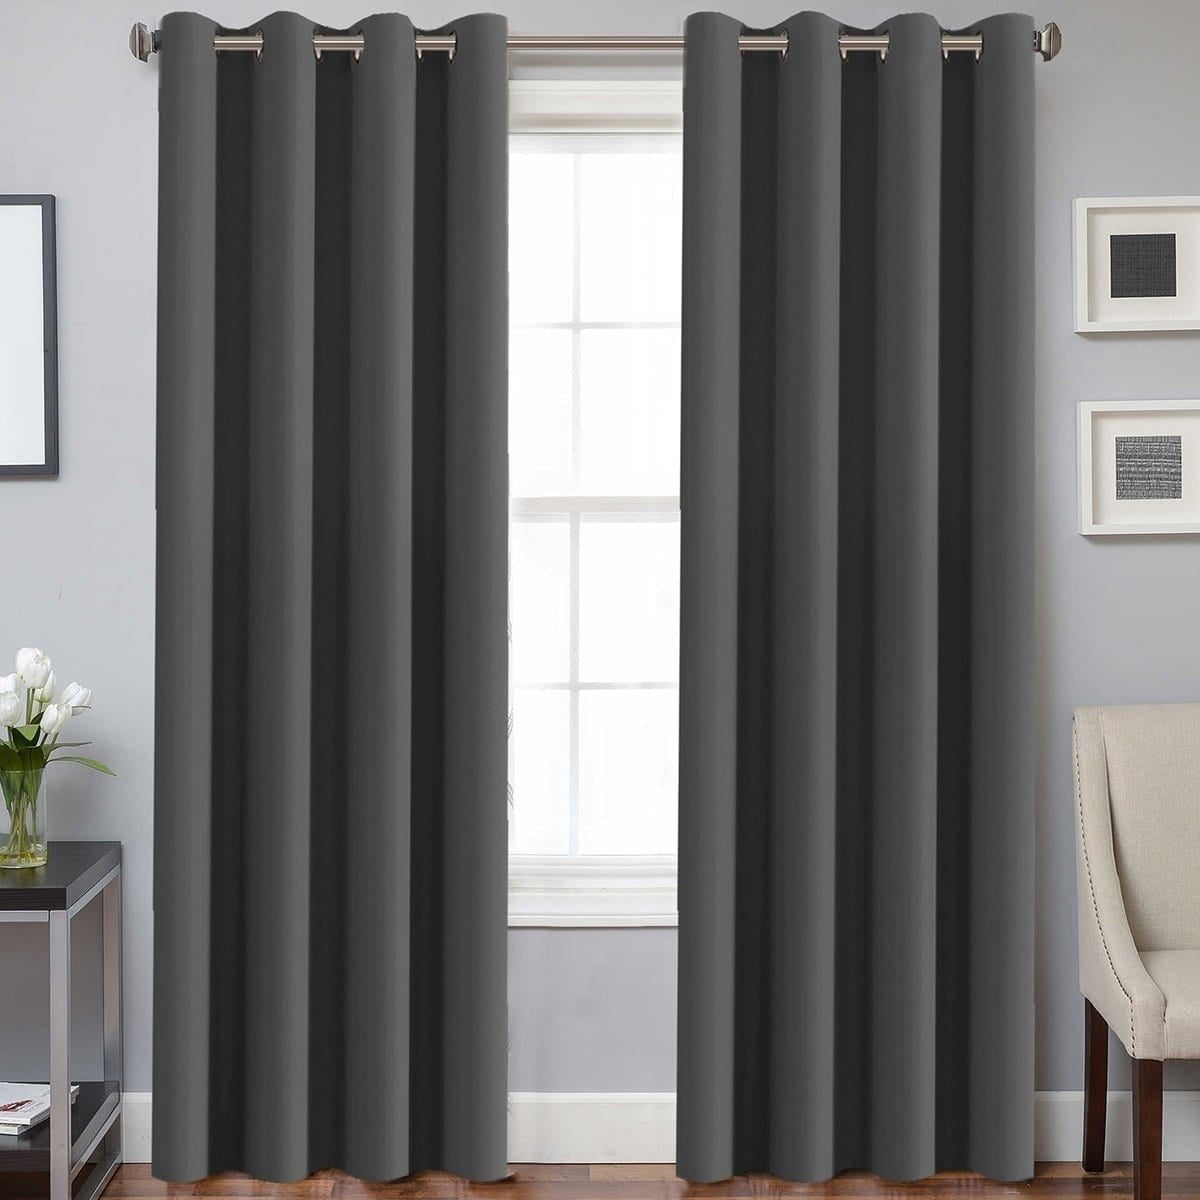 Galleria Blackout Thermal insulated Stripe Window Grommet Curtain One Panel 